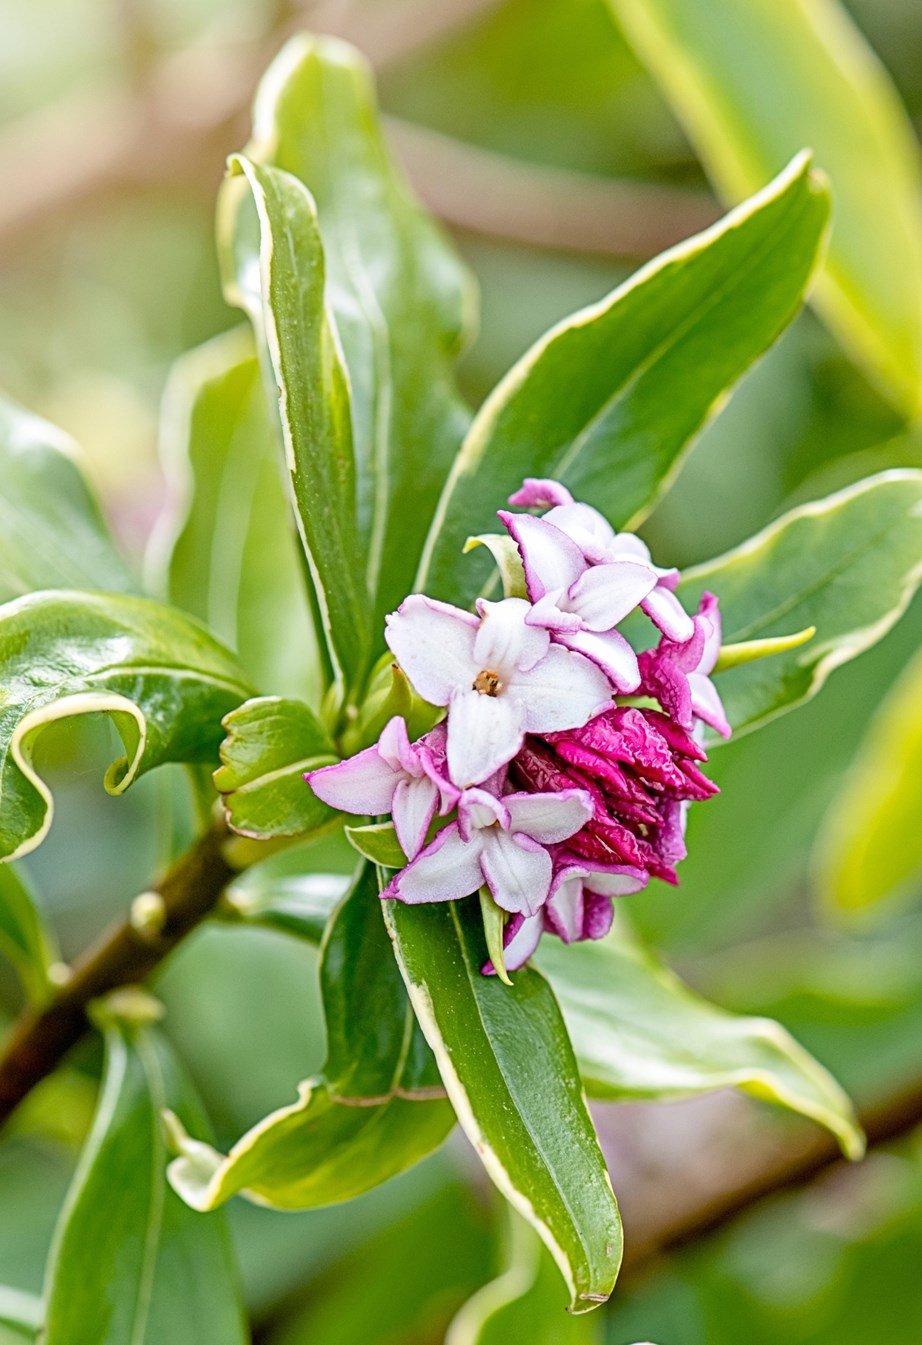 Depending on the species, daphne flower can be white, cream, yellow or pink. Photo: Getty